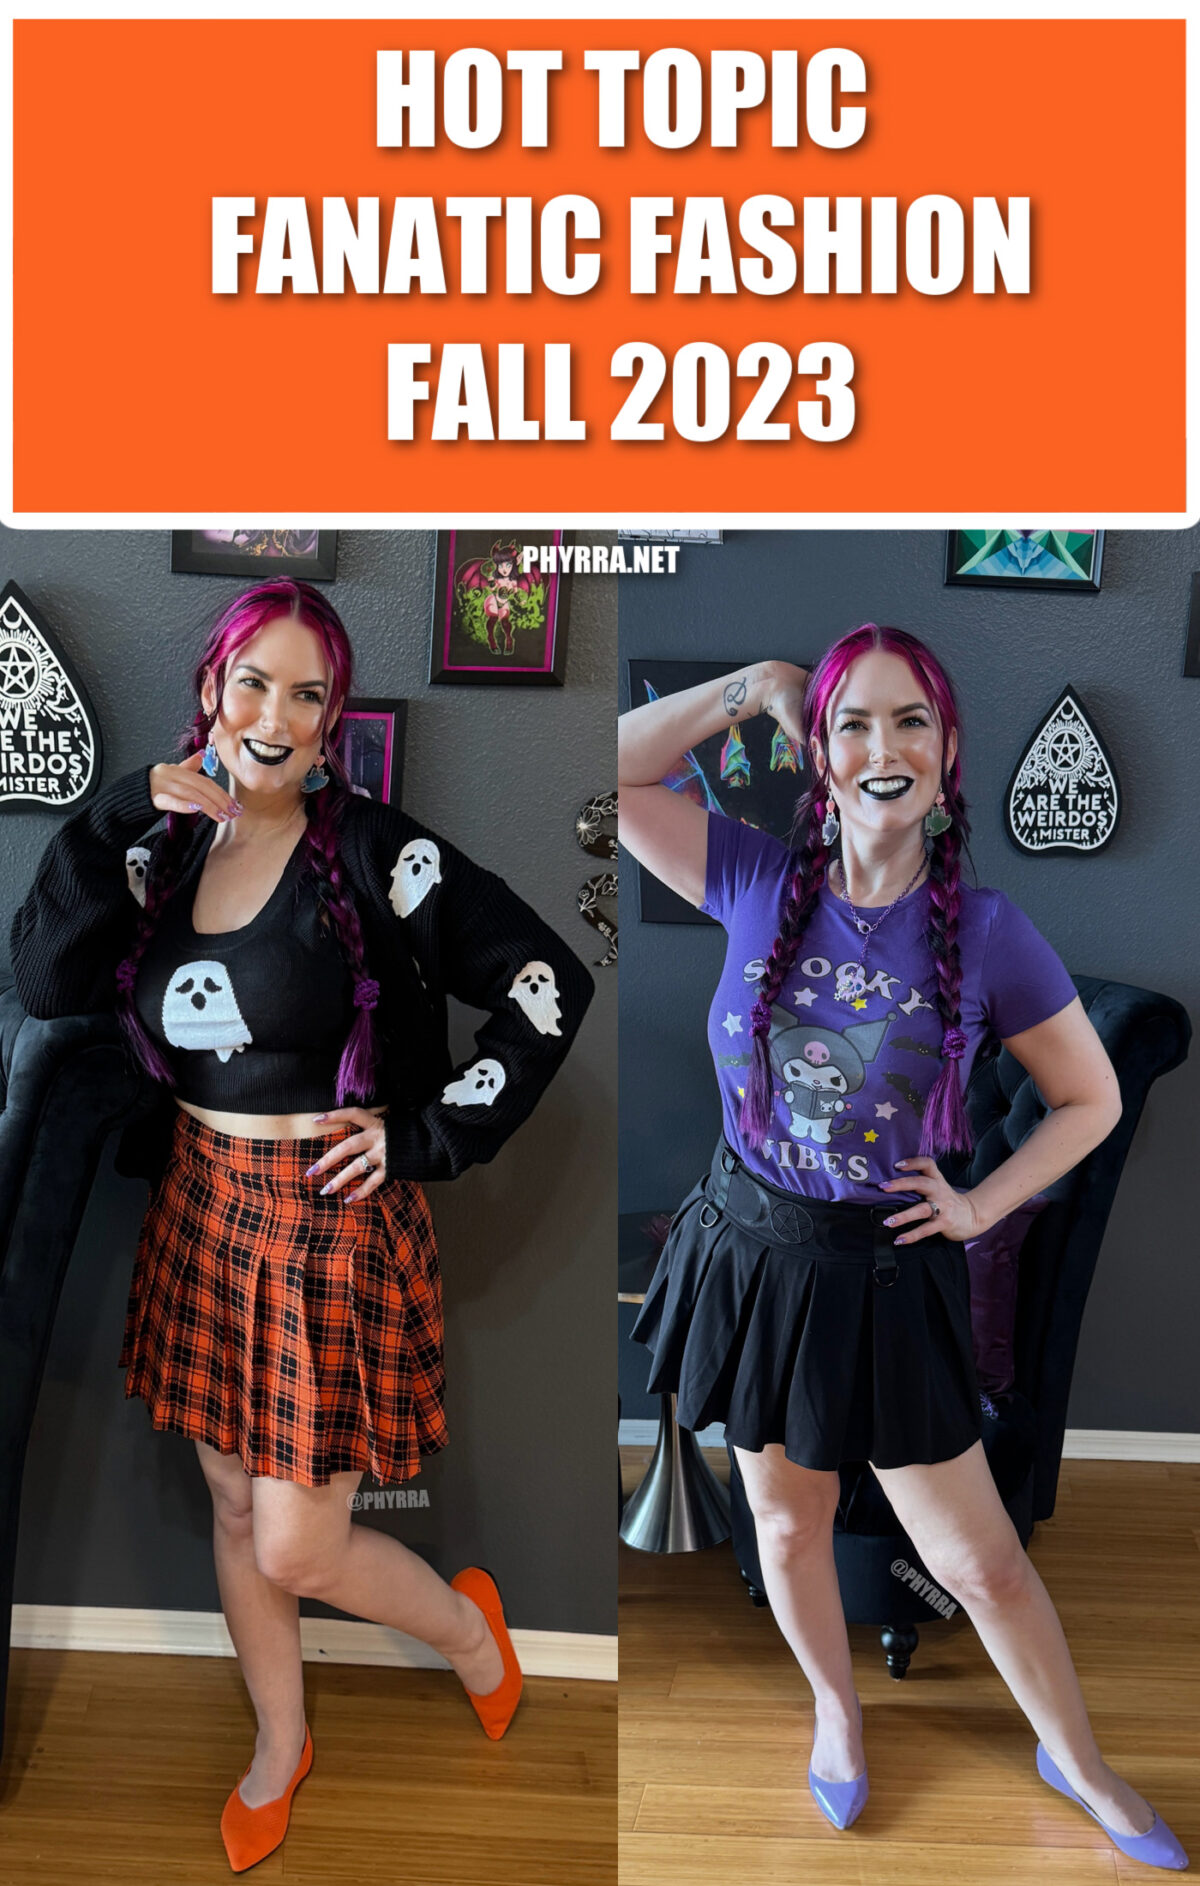 Hot Topic Fanatic Fashion for goth and alternative fashion lovers